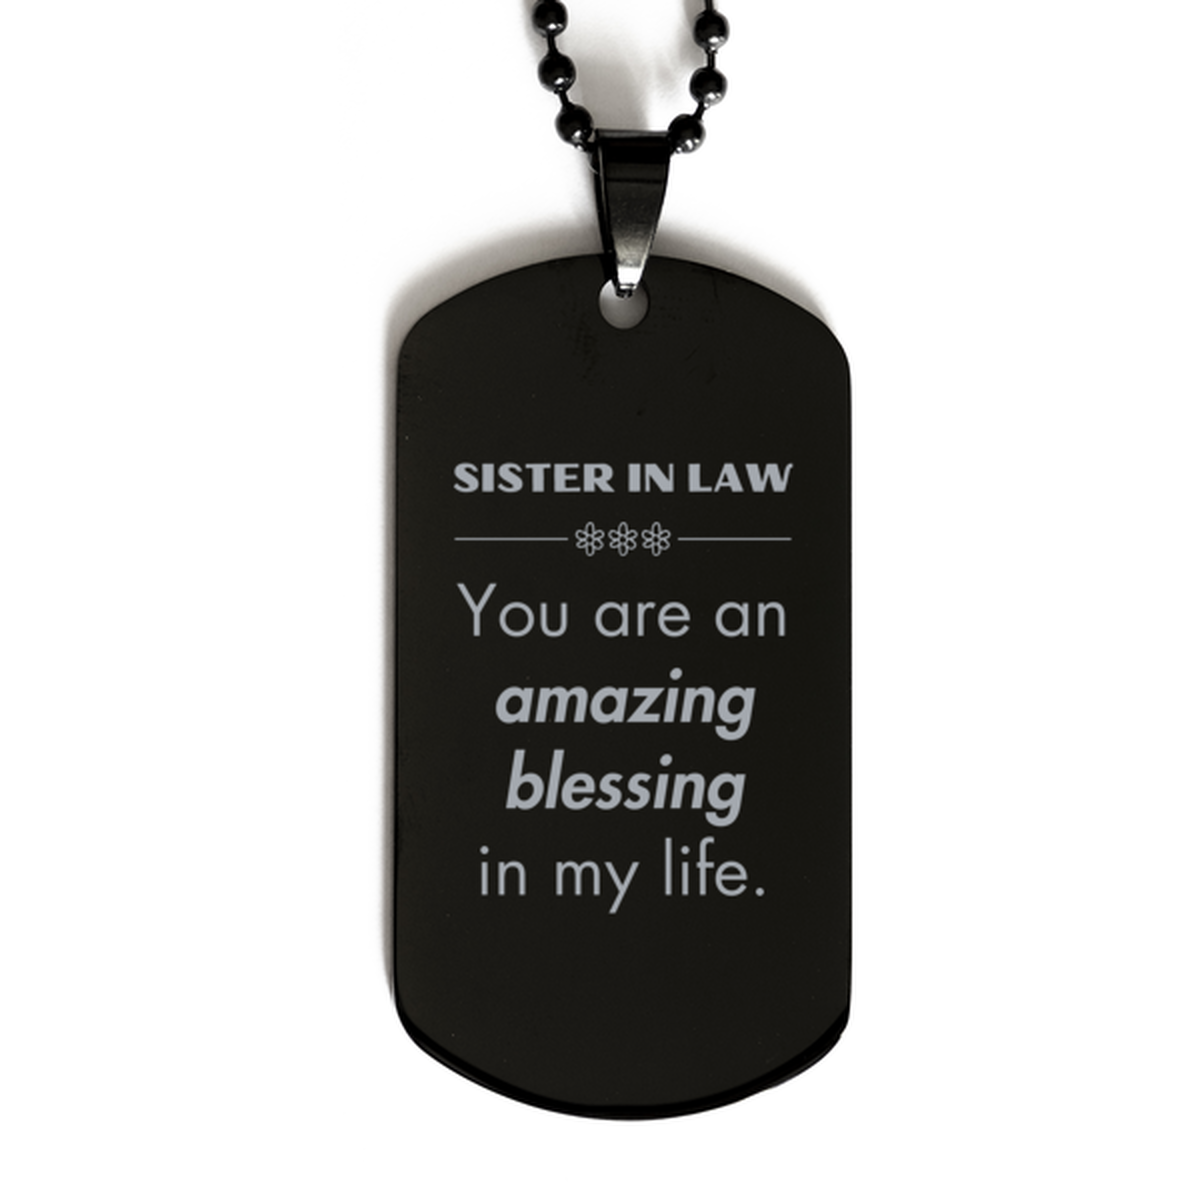 Sister In Law Black Dog Tag, You are an amazing blessing in my life, Thank You Gifts For Sister In Law, Inspirational Birthday Christmas Unique Gifts For Sister In Law